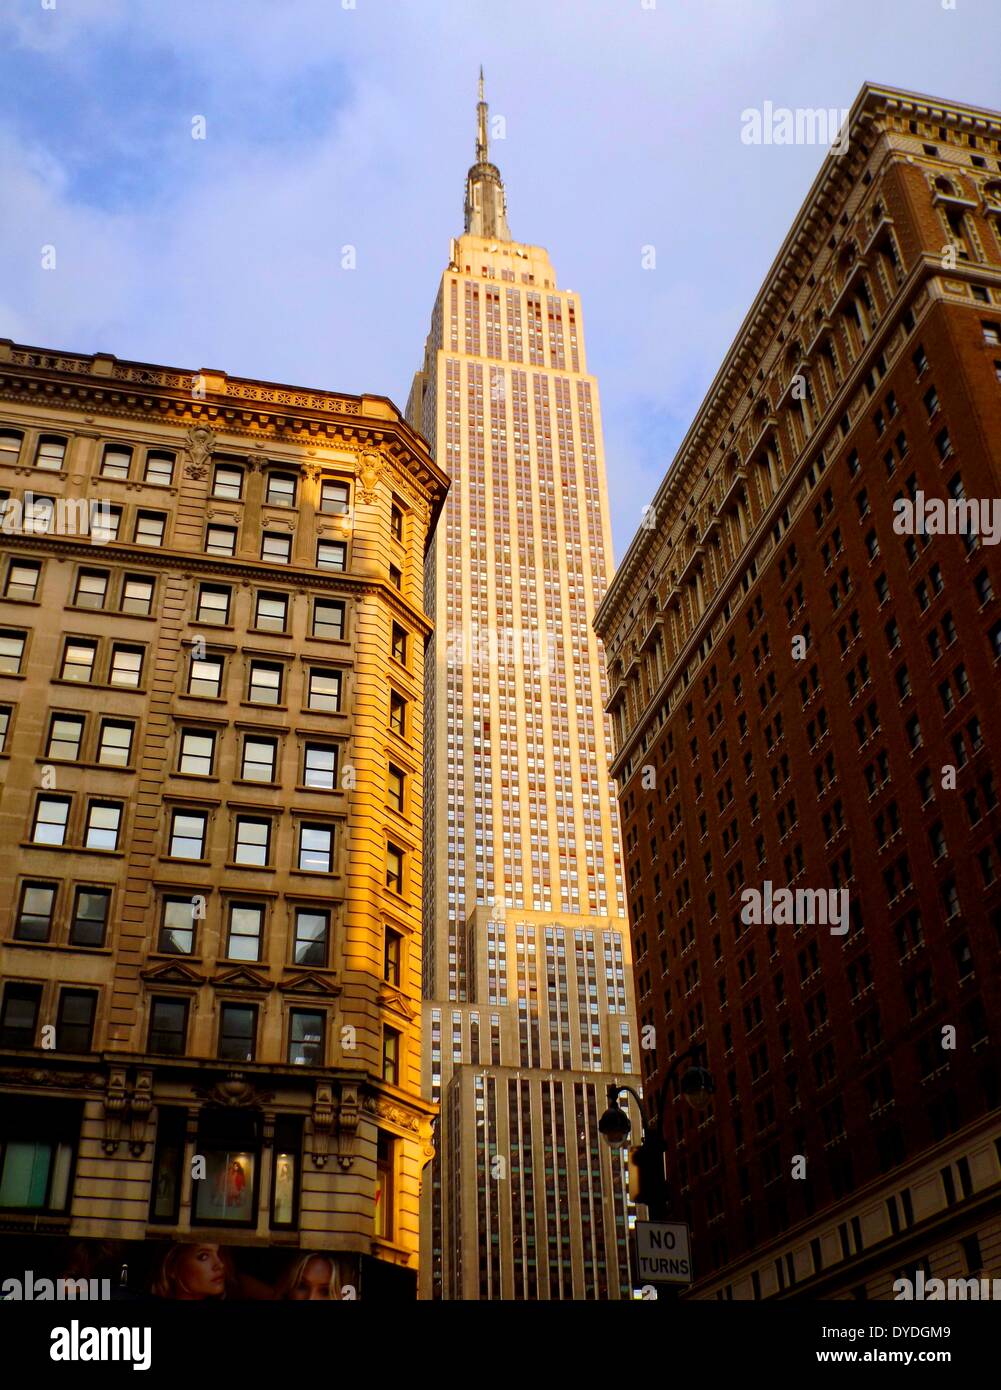 late nineteenth or early twentieth century apartments and offices, are sitting below the soaring Empire State Building, New York City Stock Photo